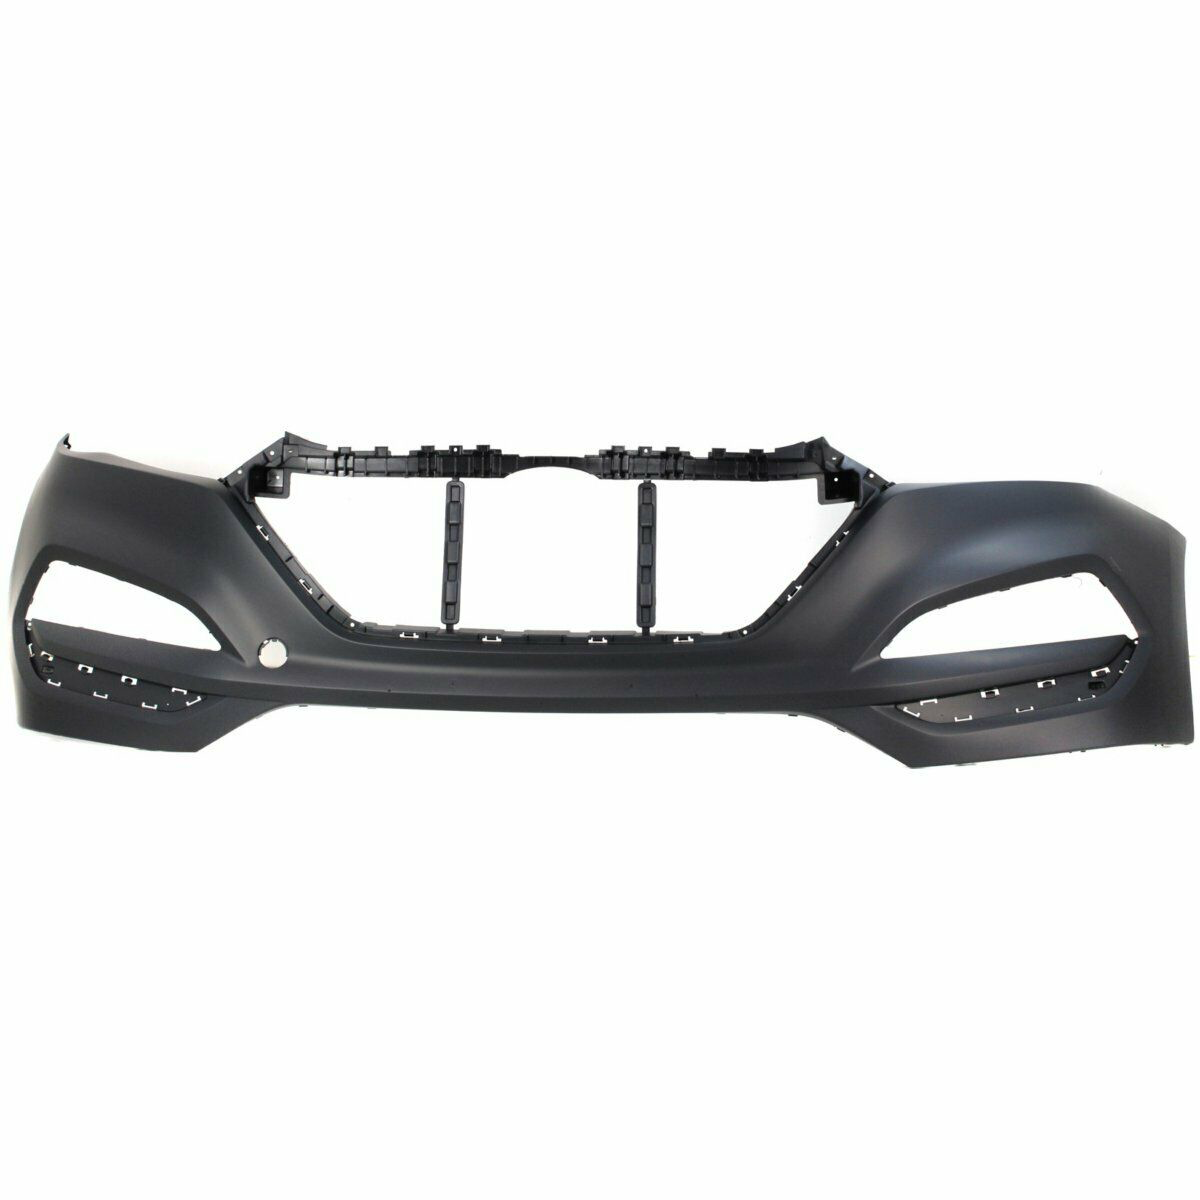 2016-2017 Hyundai Tucson Upper Front Bumper Painted to Match